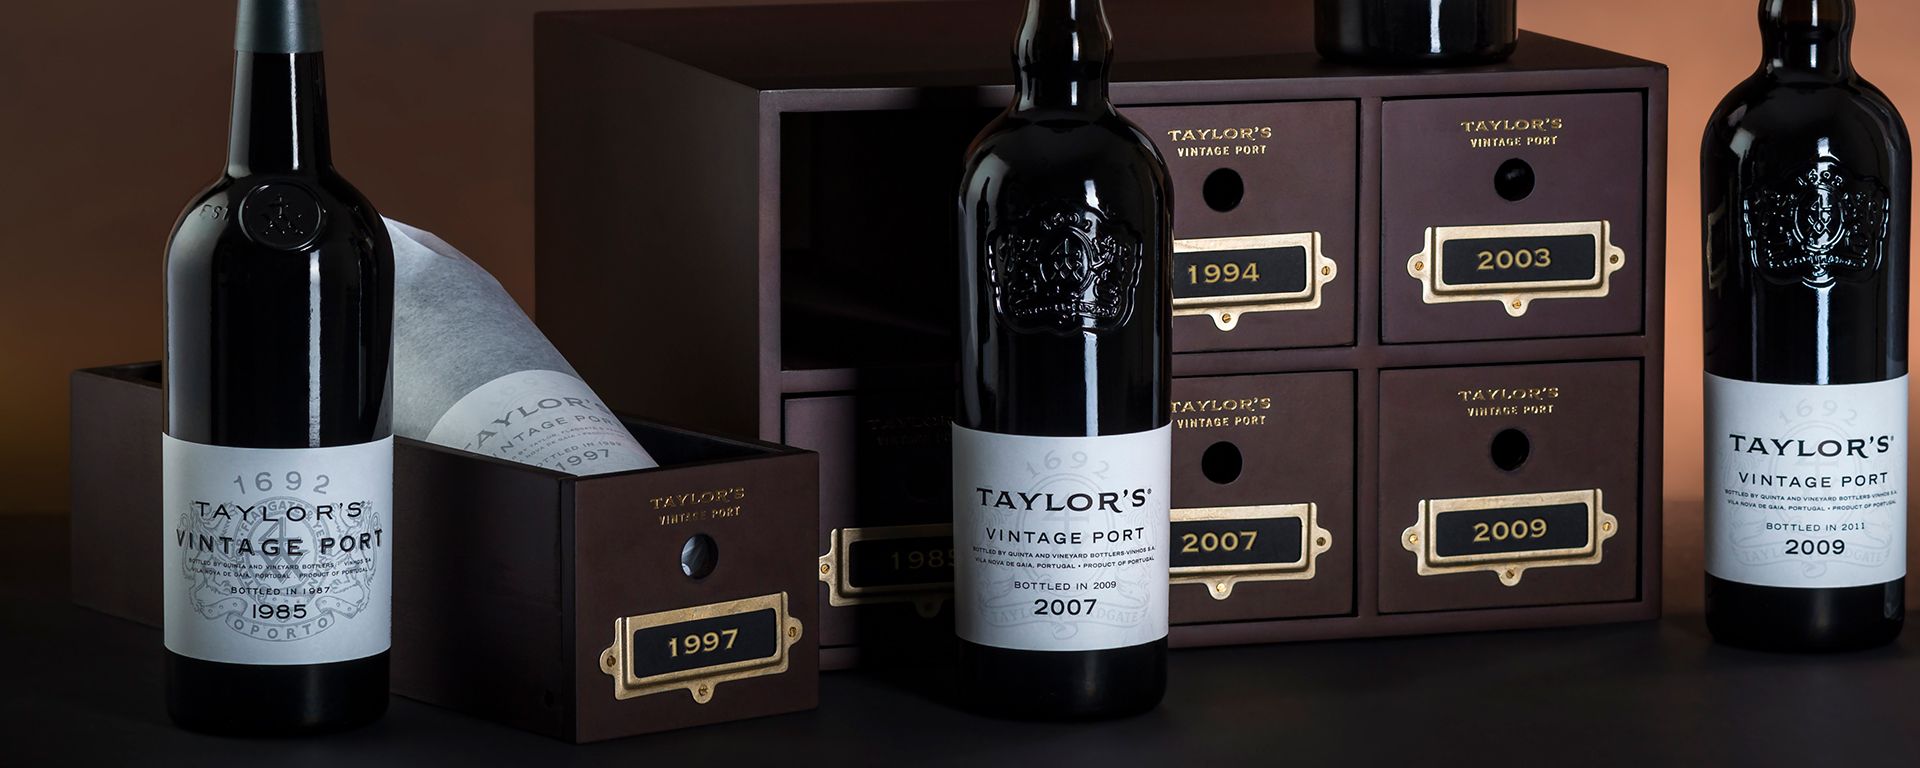 Taylor’s Vintage Port is one of the world’s great iconic wines. Made only in the very finest years  – known as...